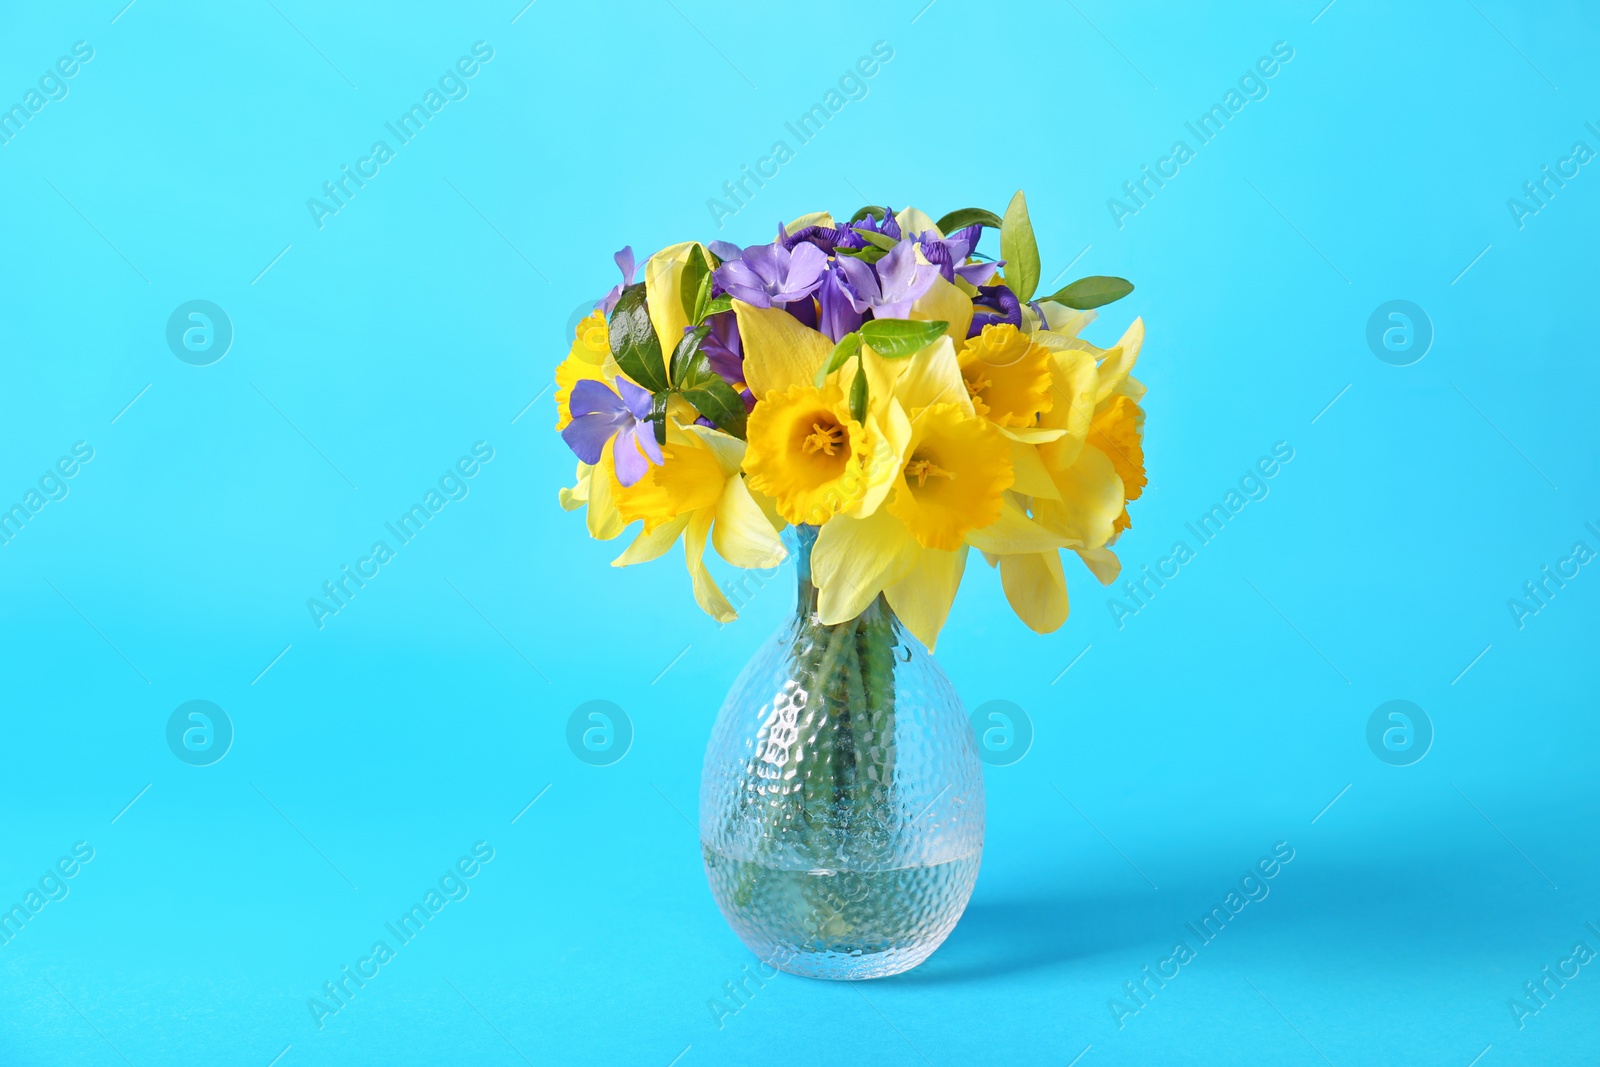 Photo of Bouquet of beautiful yellow daffodils, iris and periwinkle flowers in vase on light blue background